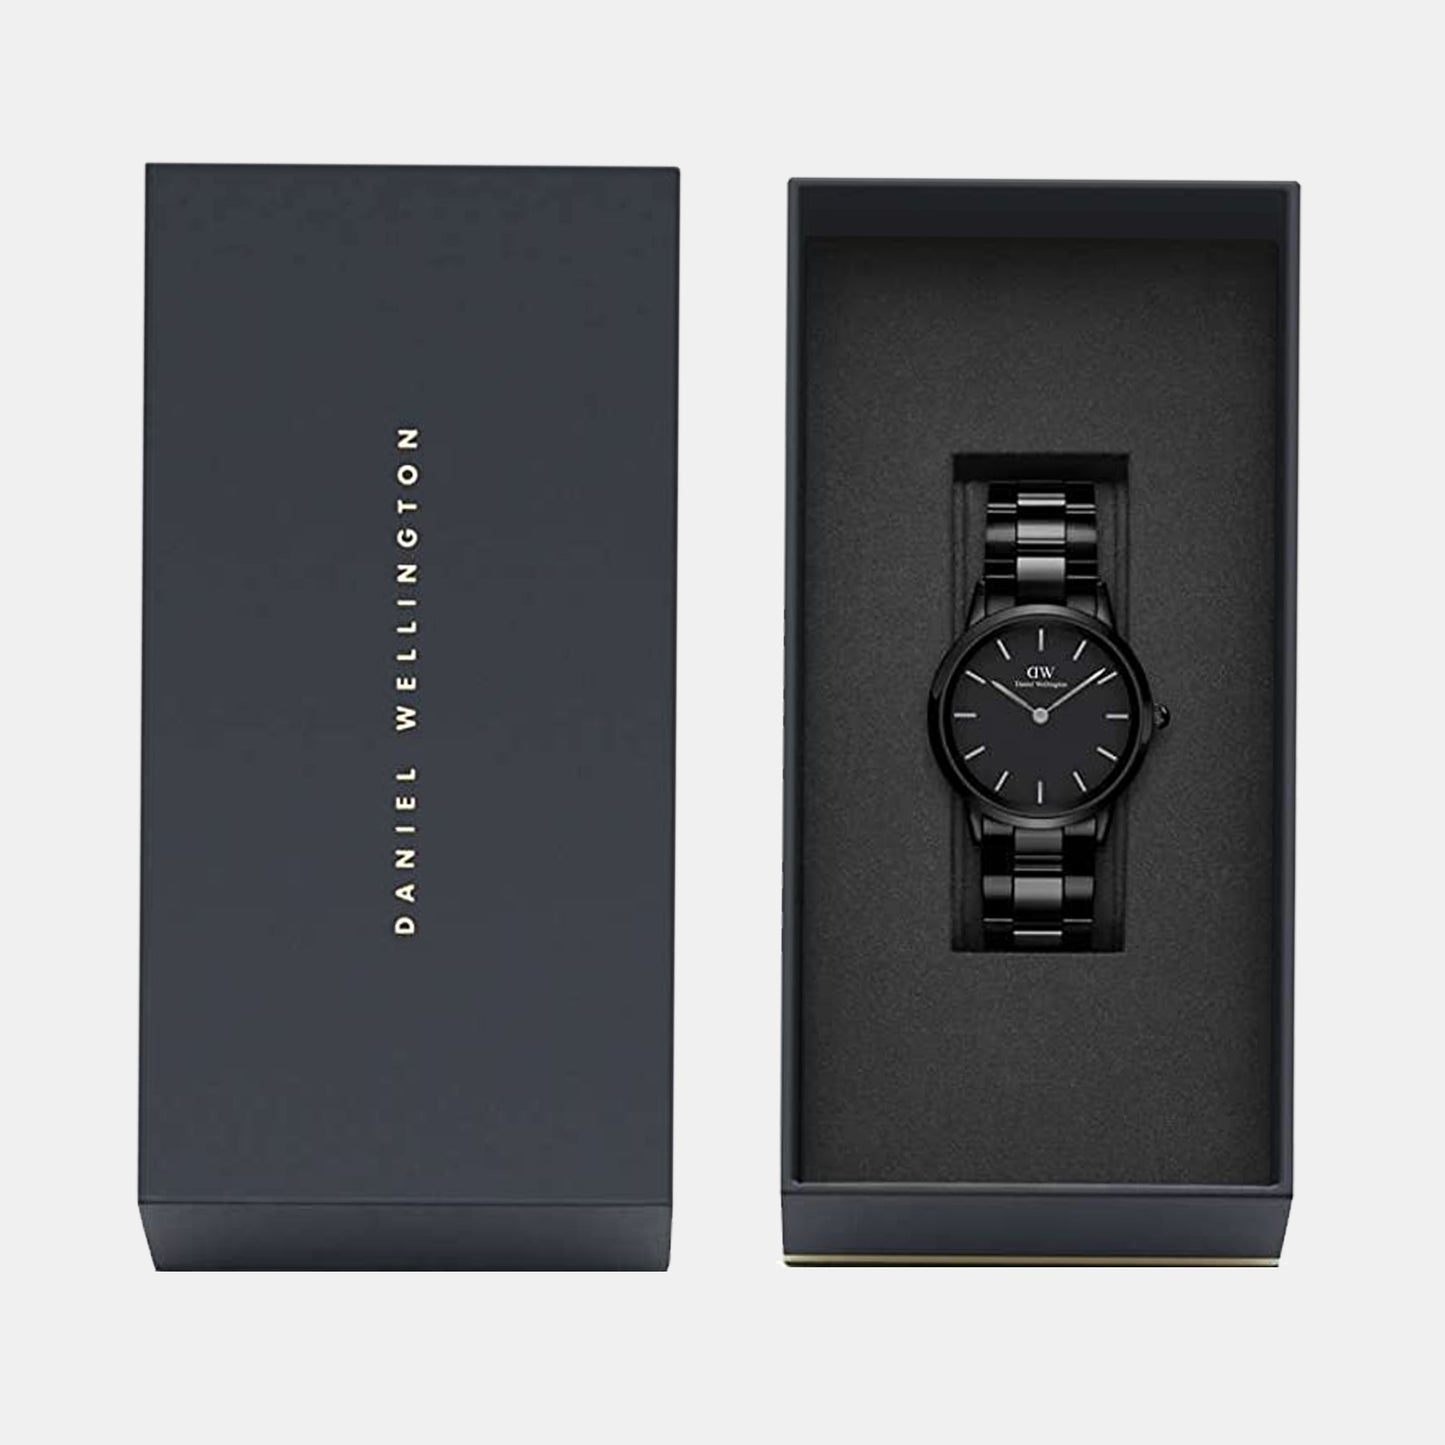 Iconic Women's Black Analog Stainless Steel Watch DW00100414